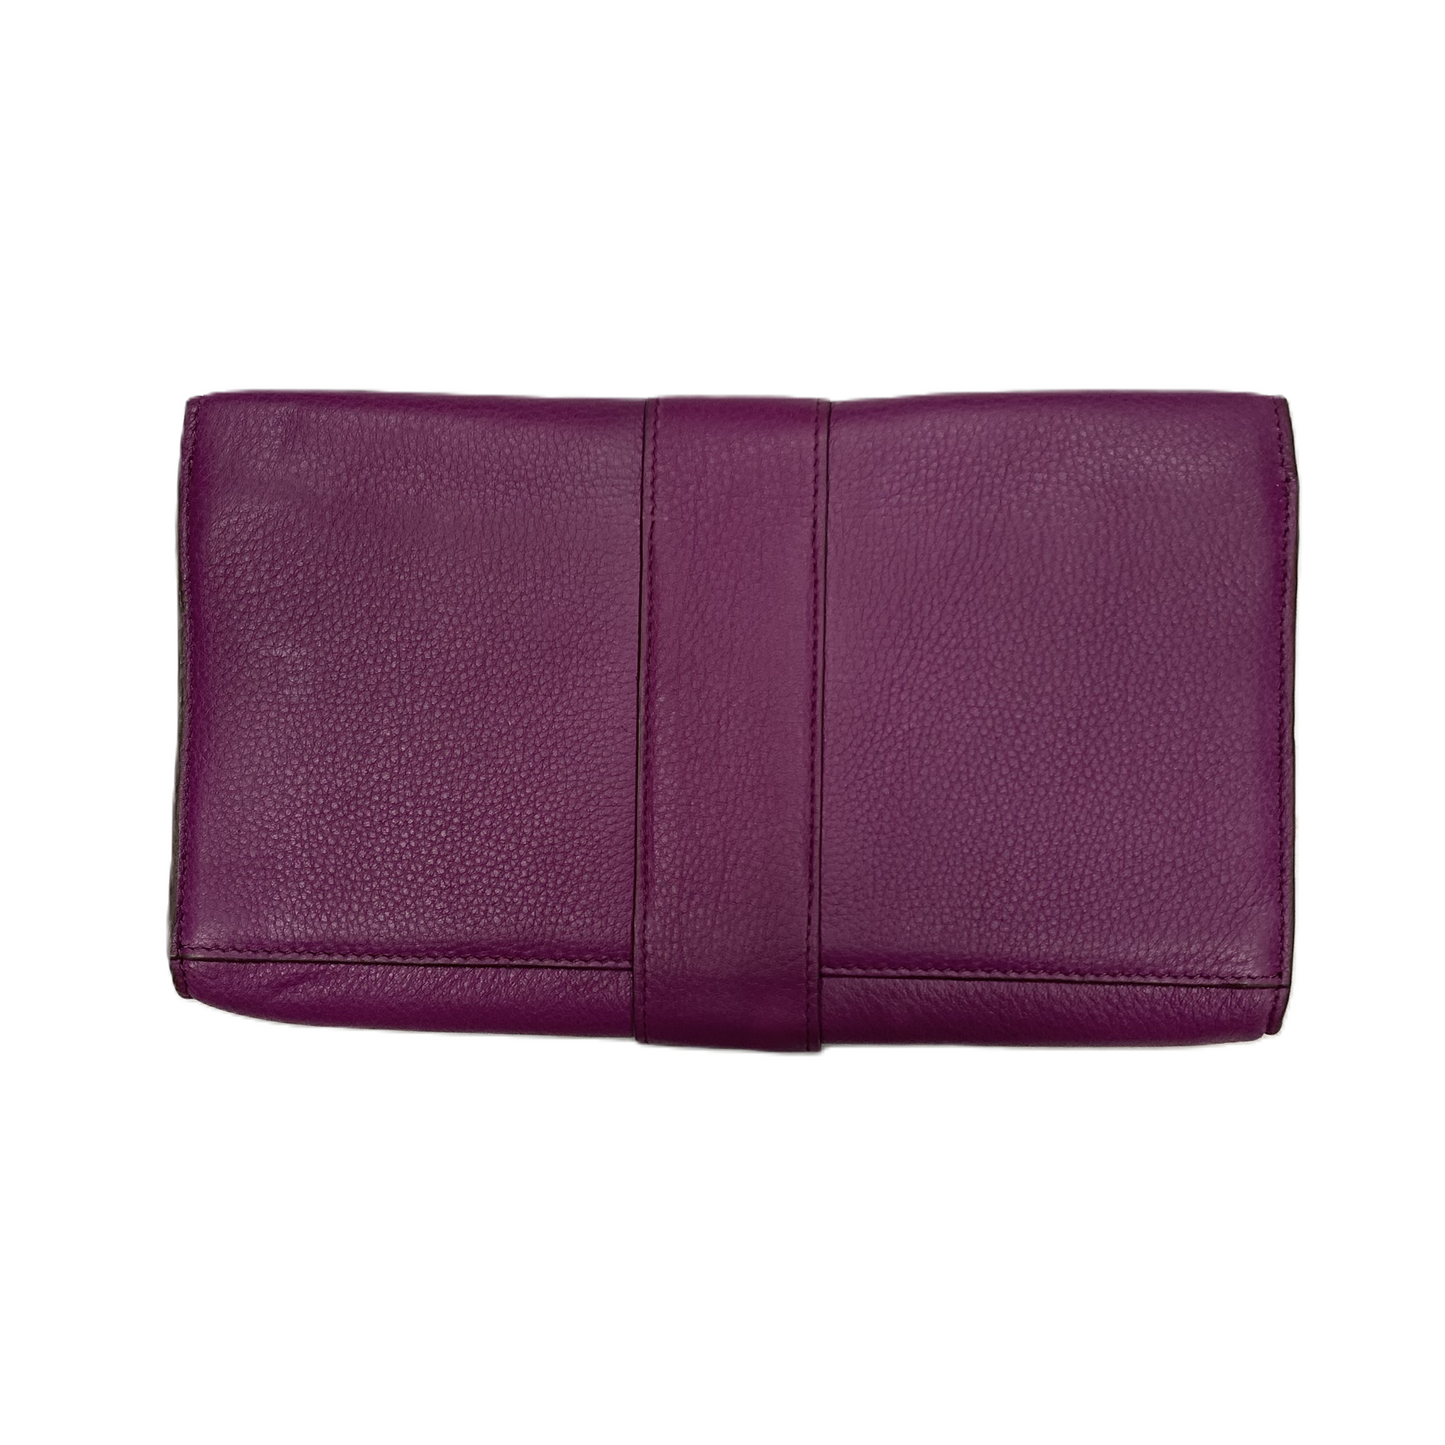 Clutch By Vince Camuto, Size: Large